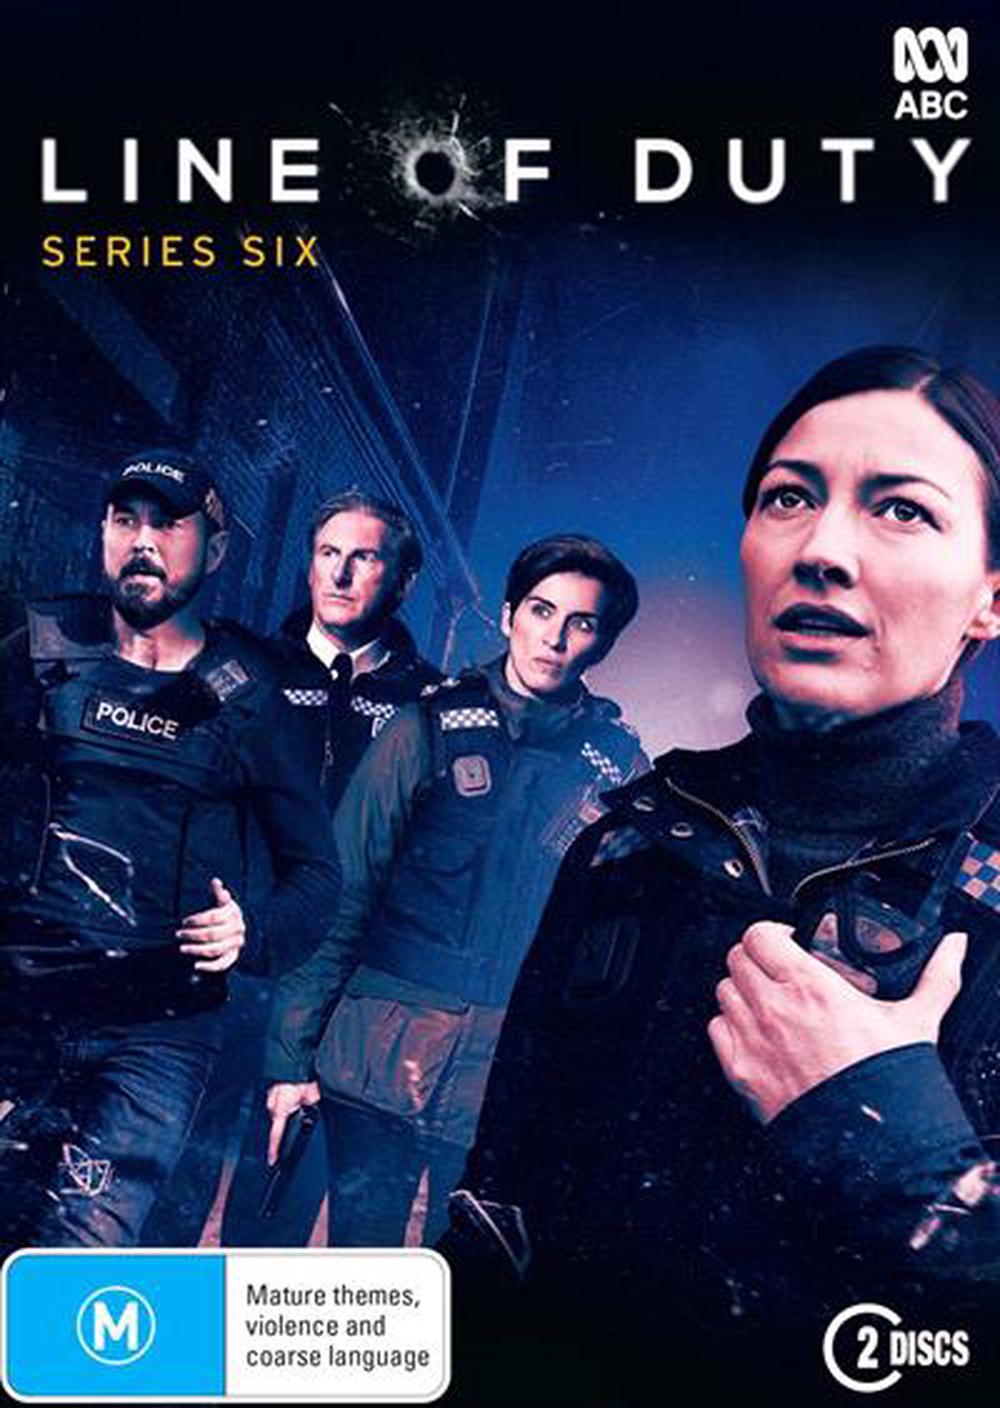 Line Of Duty Season 6 Dvd Buy Online At The Nile